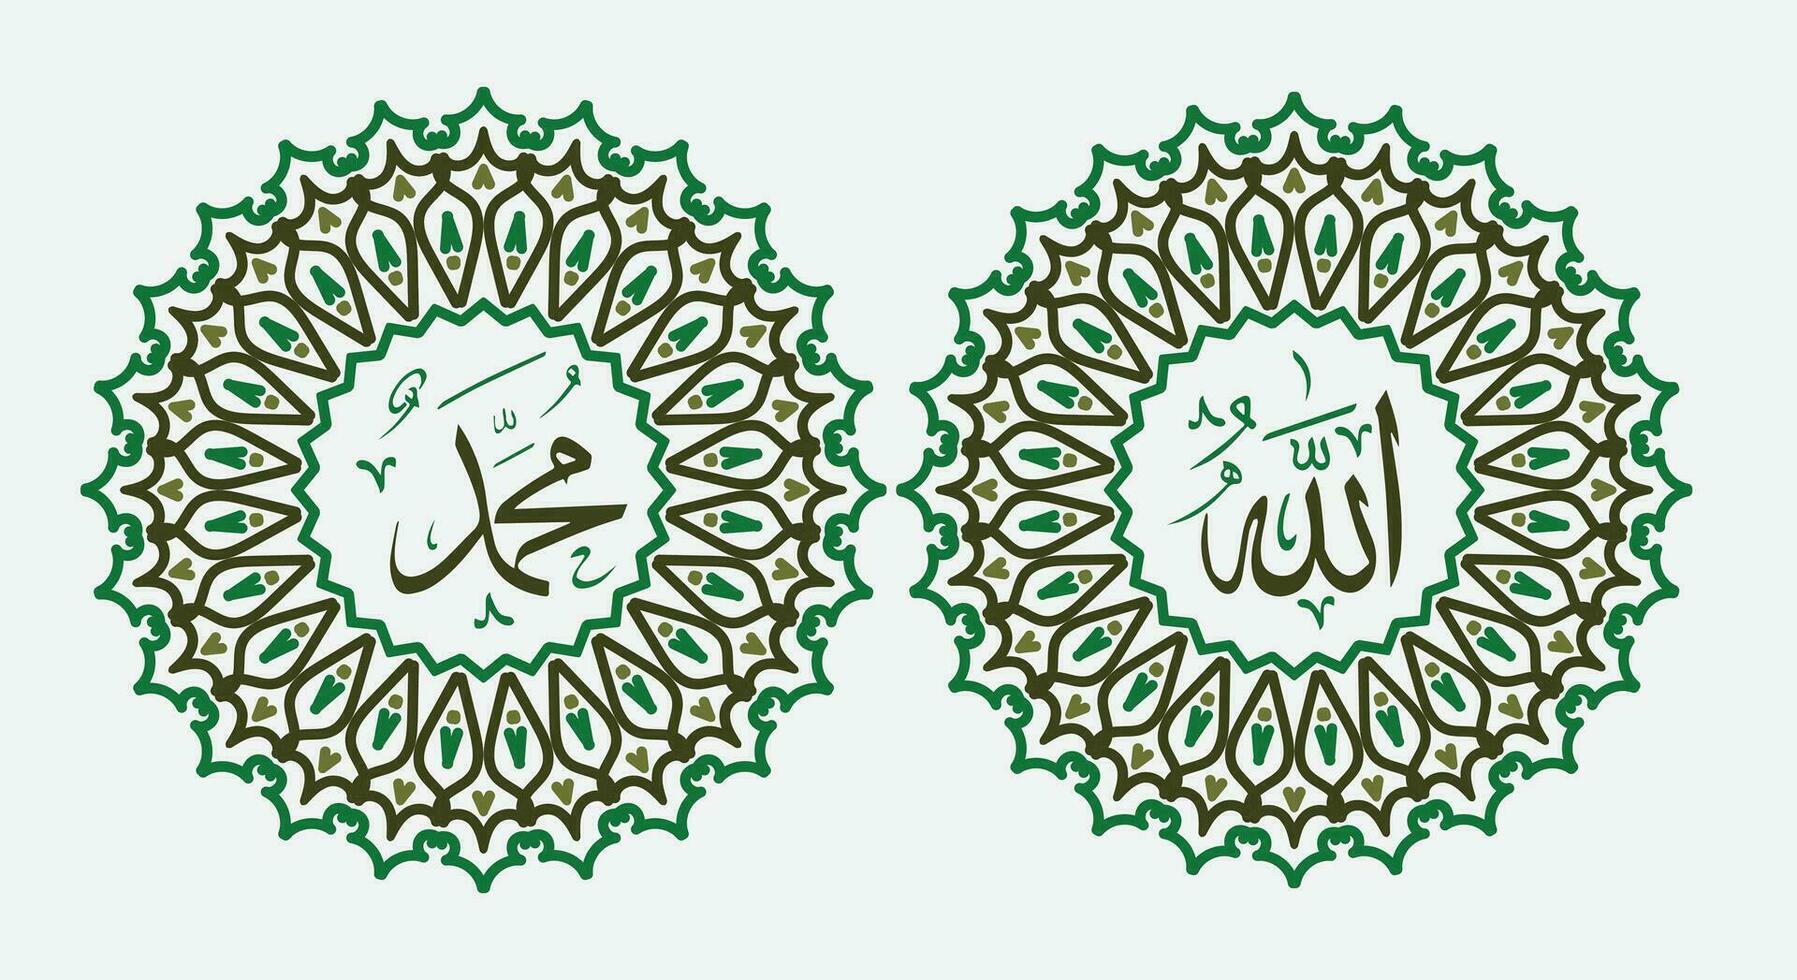 Allah muhammad Name of Allah muhammad, Allah muhammad Arabic islamic calligraphy art, with traditional frame and green color vector